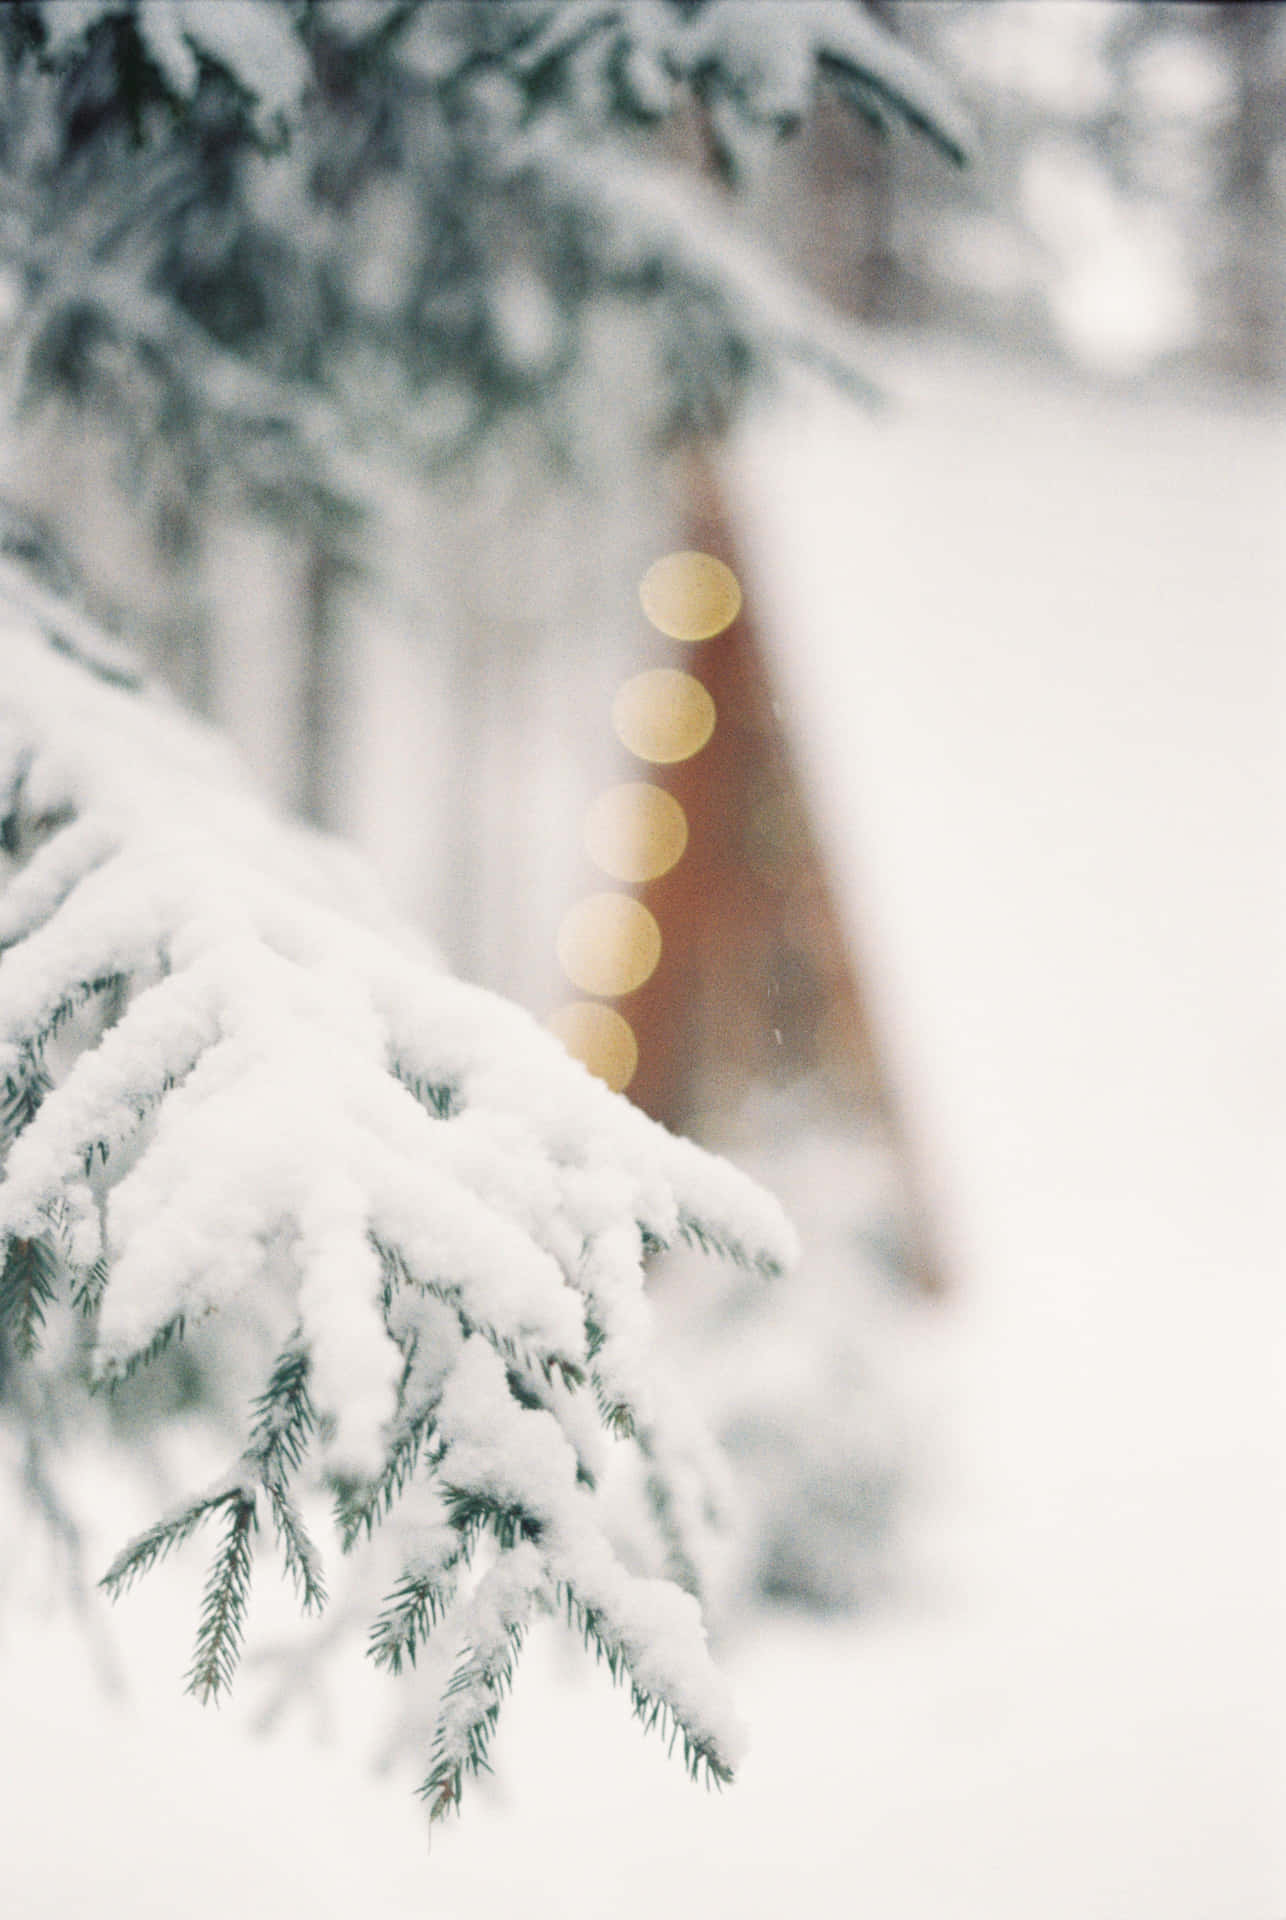 Bask in the beauty of Christmas with a night of joyful snow Wallpaper